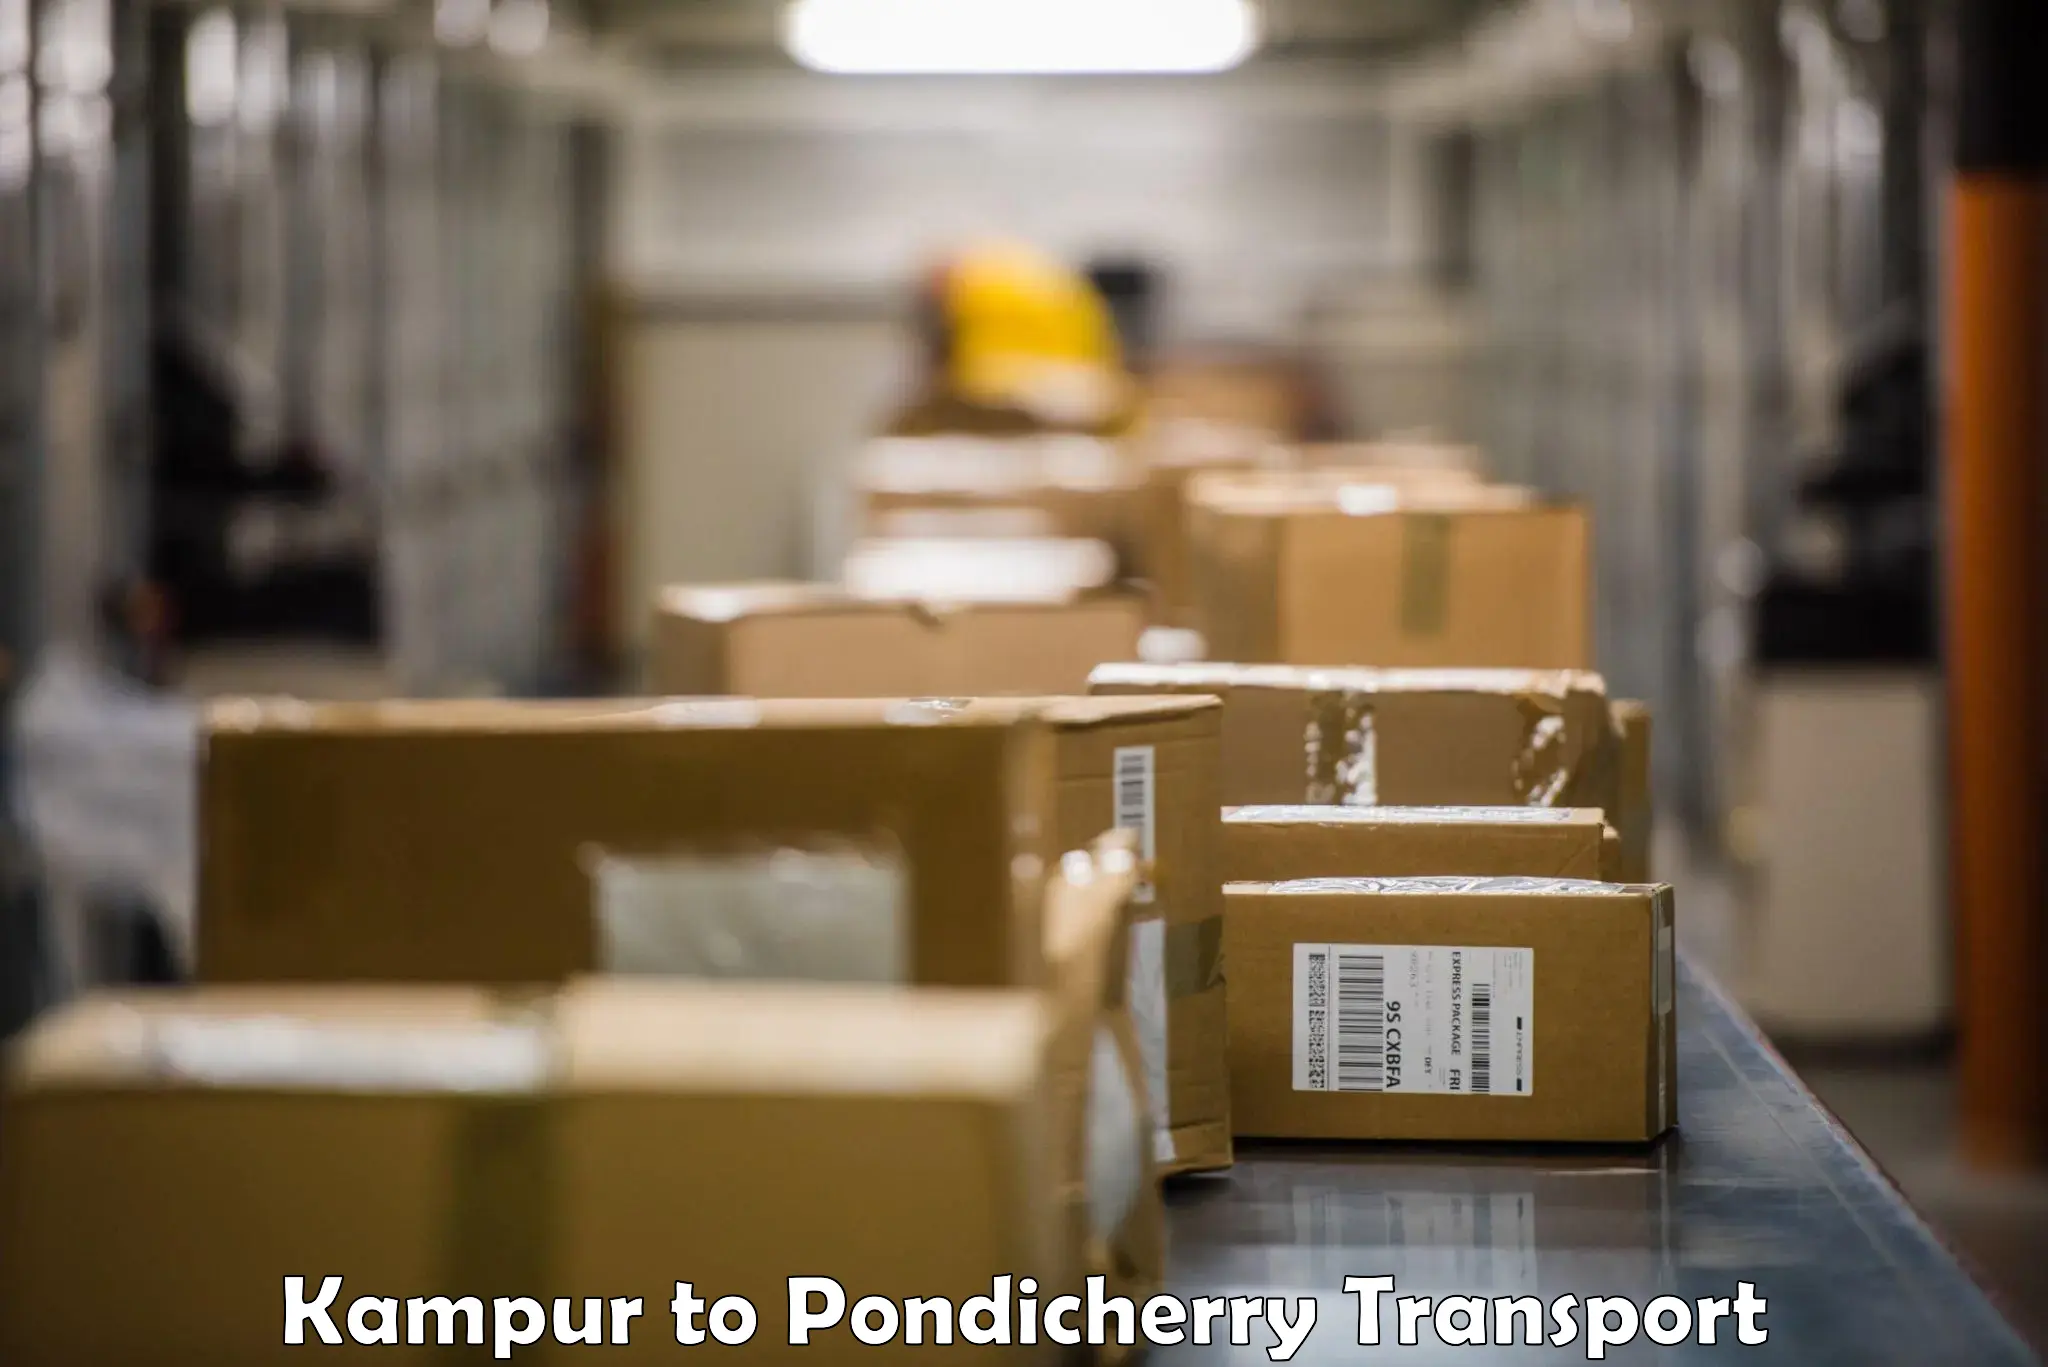 Commercial transport service Kampur to Pondicherry